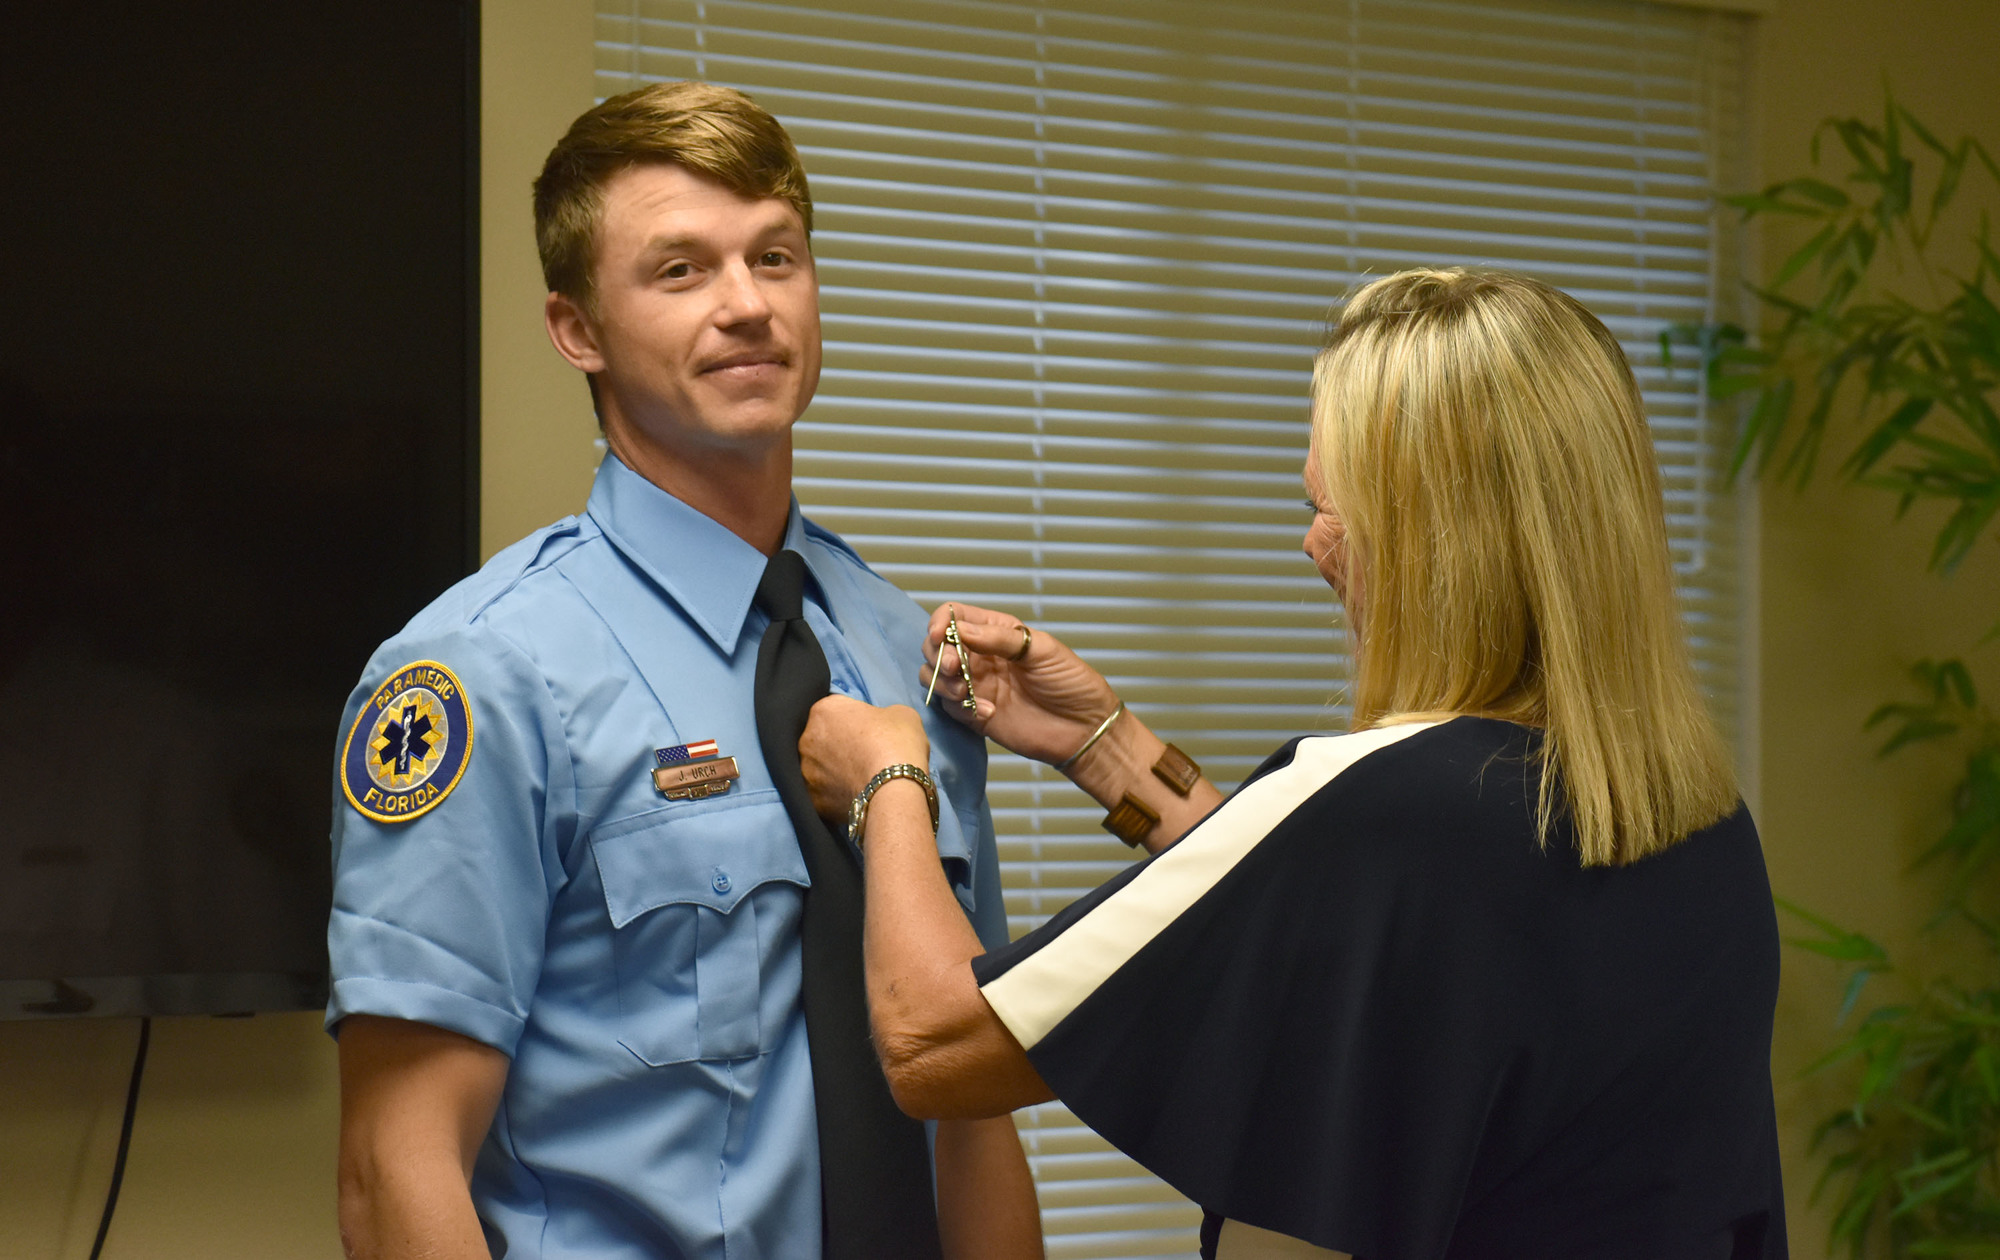 Kim Cavanagh, Urch's mother, pins his badge on his uniform.